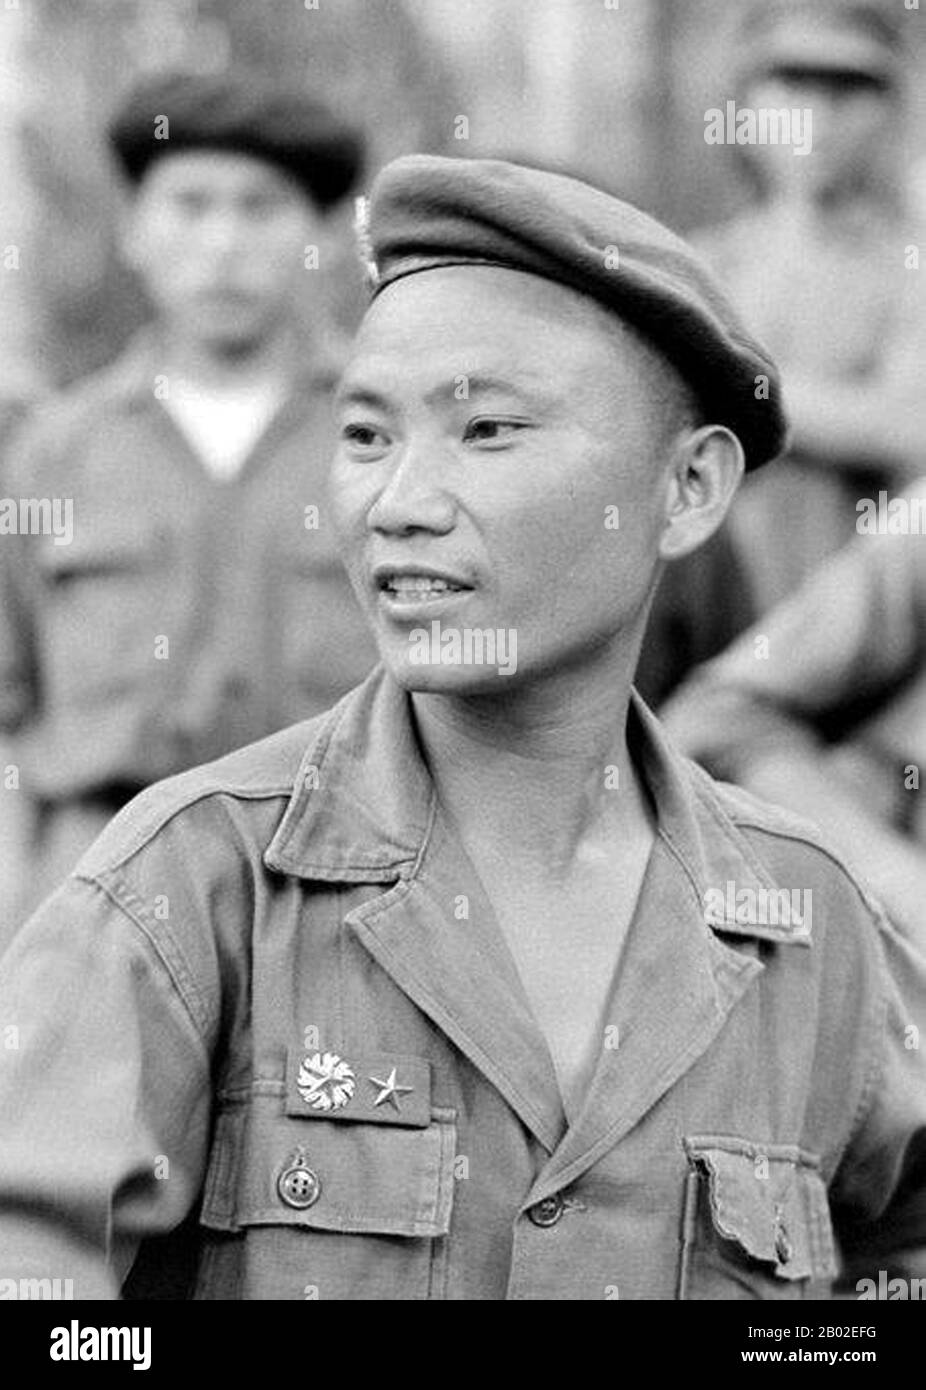 Vang Pao (Hmong: Vaj Pov; 8 December 1929 – 6 January 2011) was a Lieutenant General in the Royal Lao Army and leading figure in the American 'Secret War' in Laos (1964-1973). He was a leader in the Hmong American community in the United States. Stock Photo